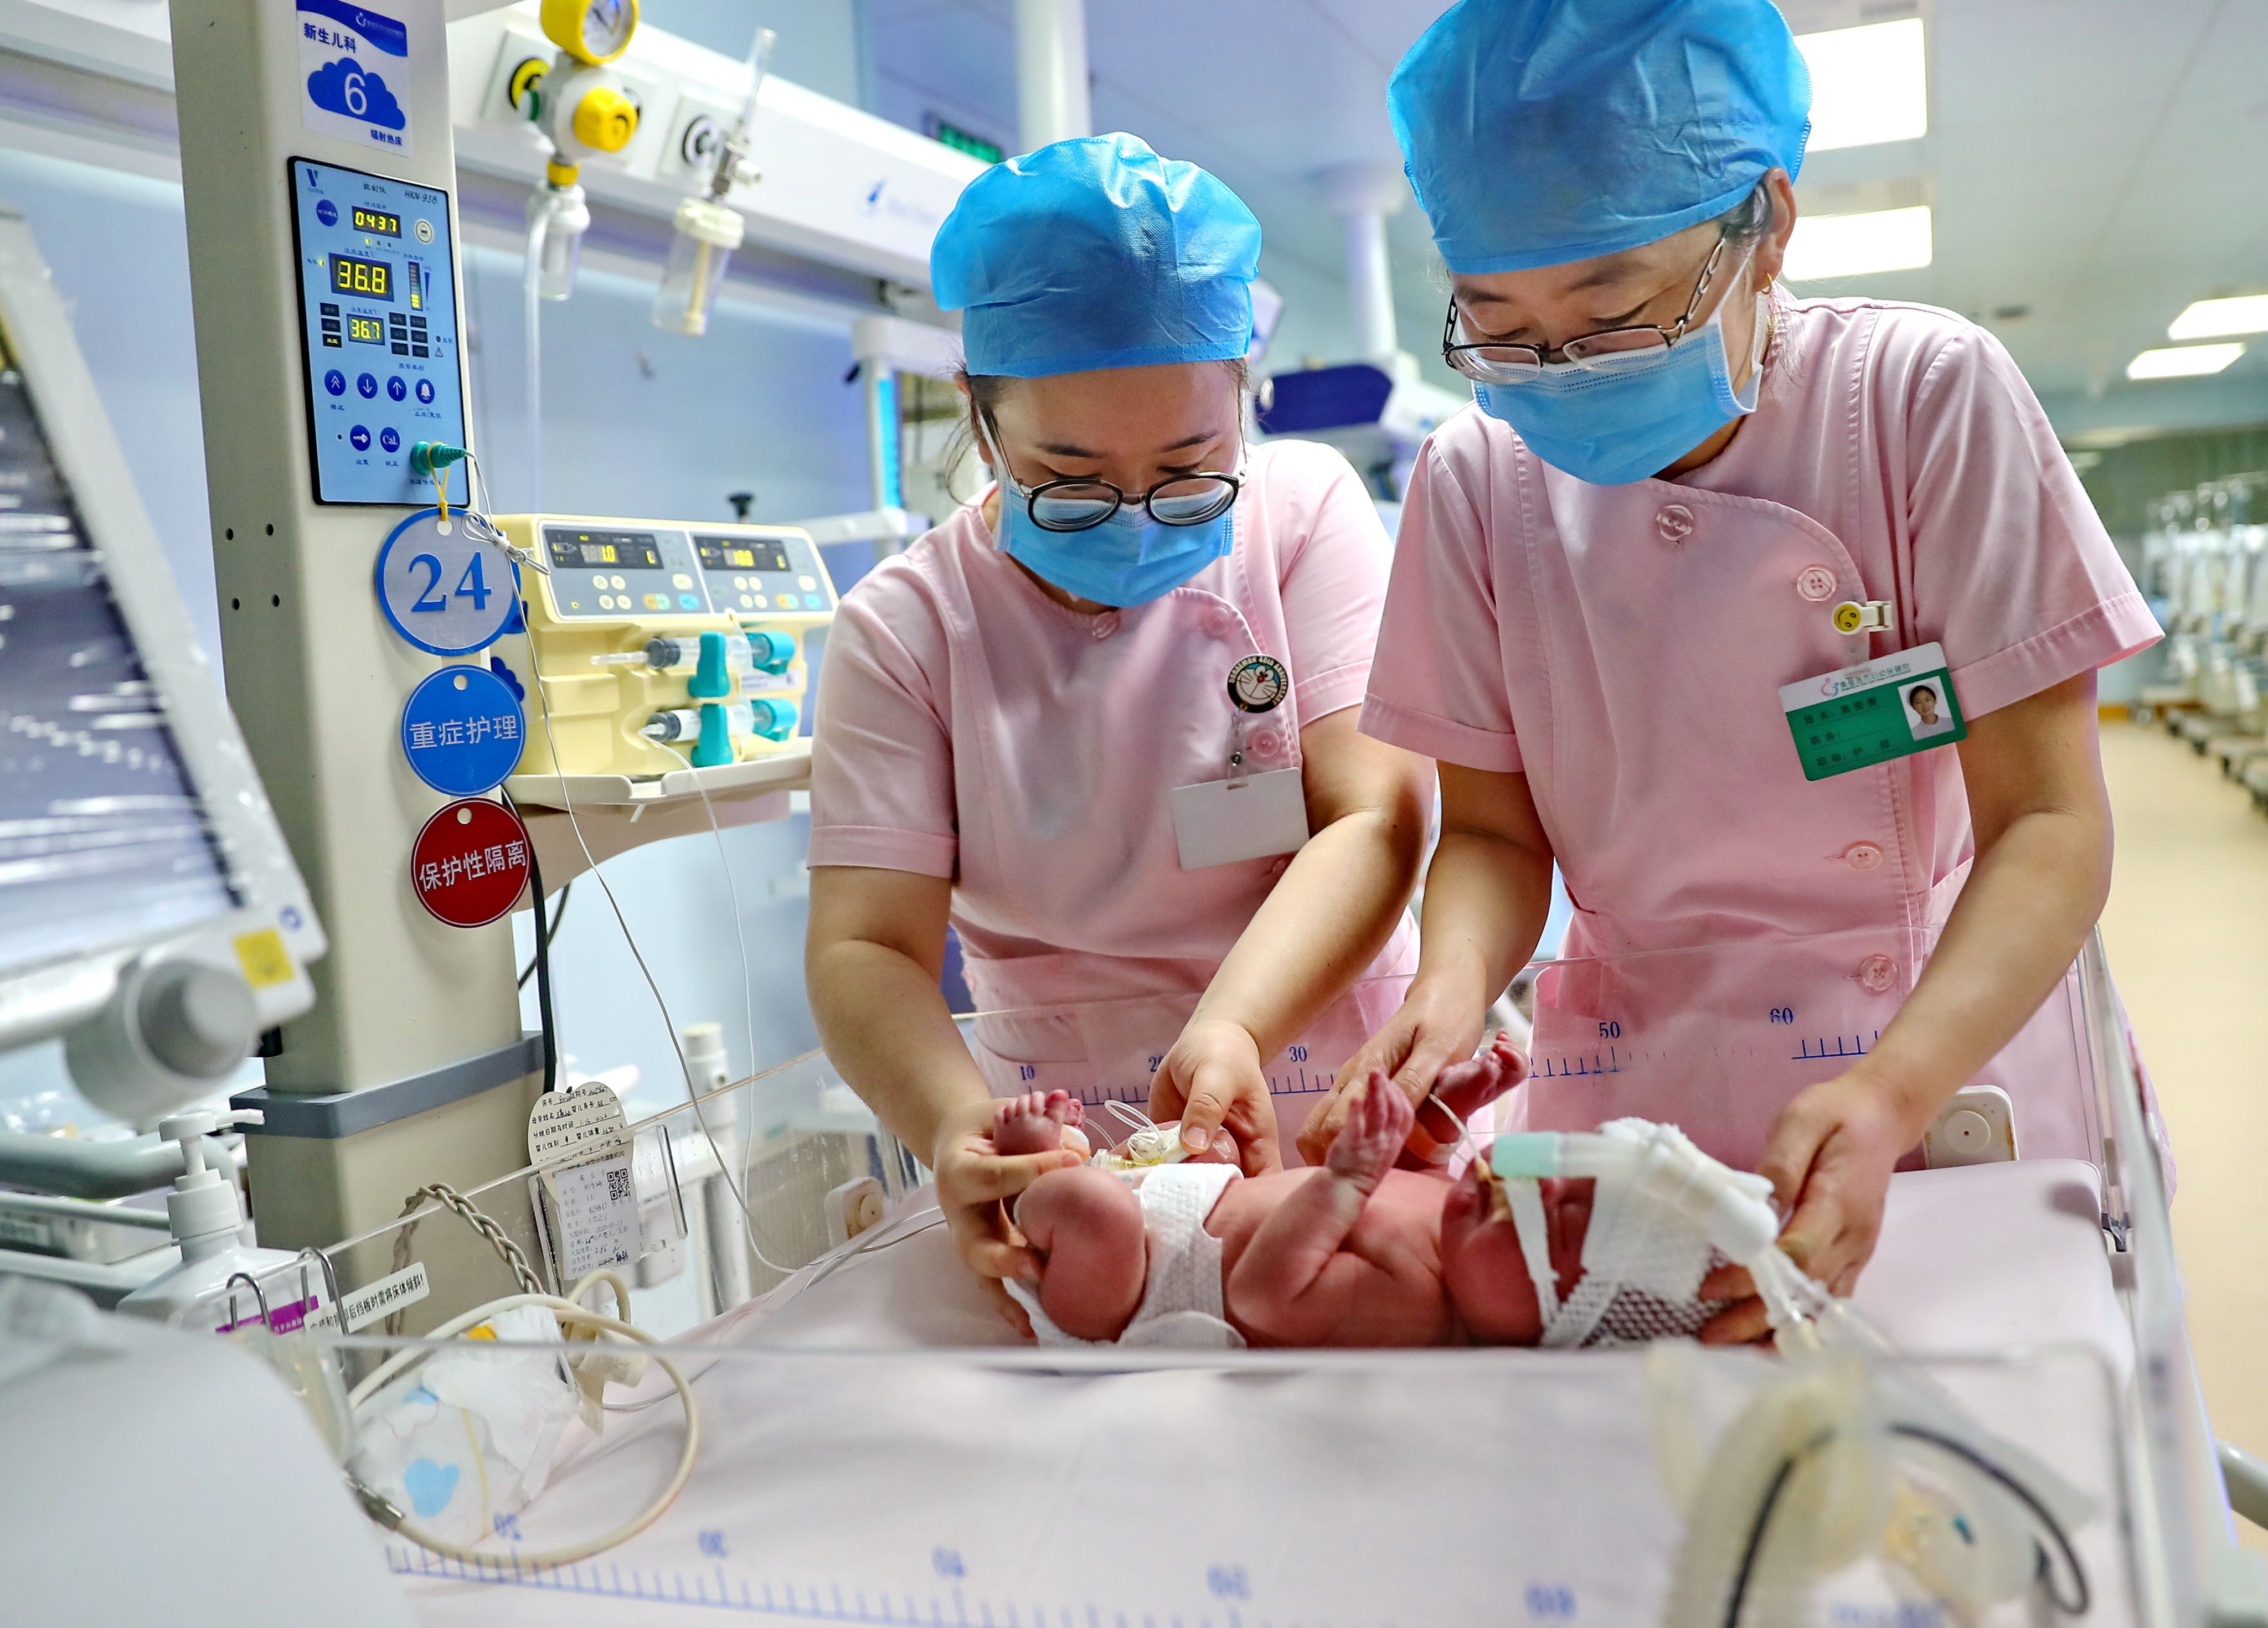 Official data showed China’s birth rate dropped to a record low in 2021, extending a downward trend that led the national government last year to begin allowing couples to have up to three children. Photo: Xinhua